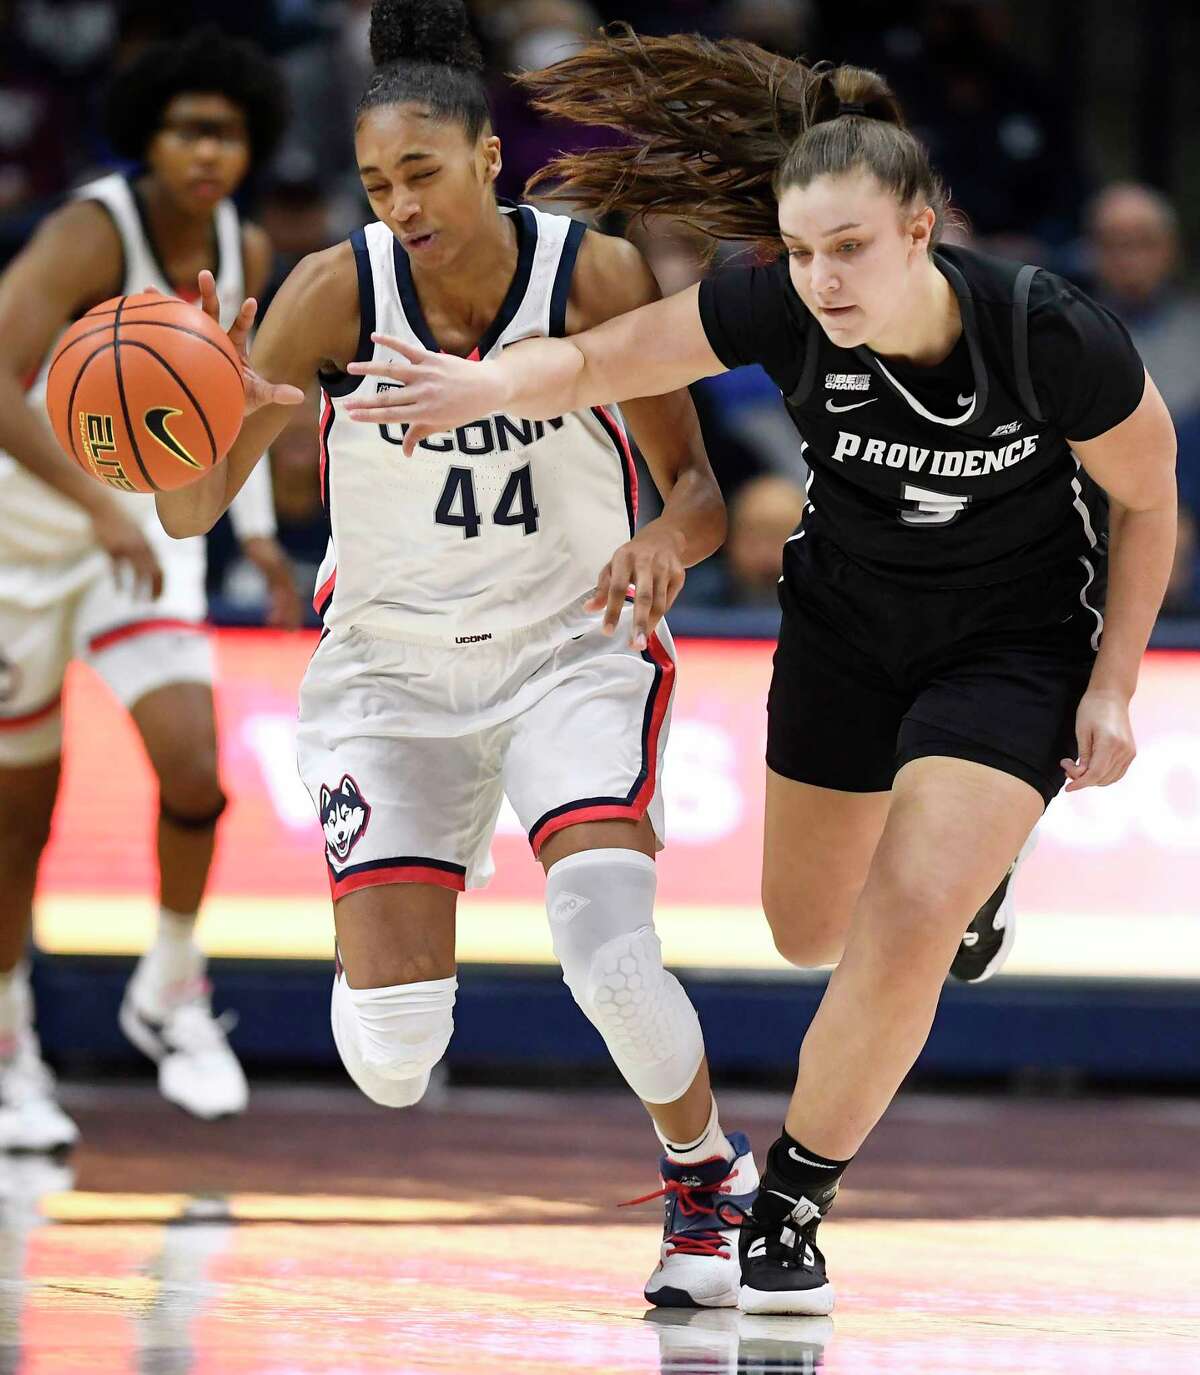 Connecticut's Aubrey Griffin (44) is fouled by Providence's Meghan Huerter (3) while stealing the ball in the first half of an NCAA college basketball game, Friday, Dec. 2, 2022, in Storrs, Conn.